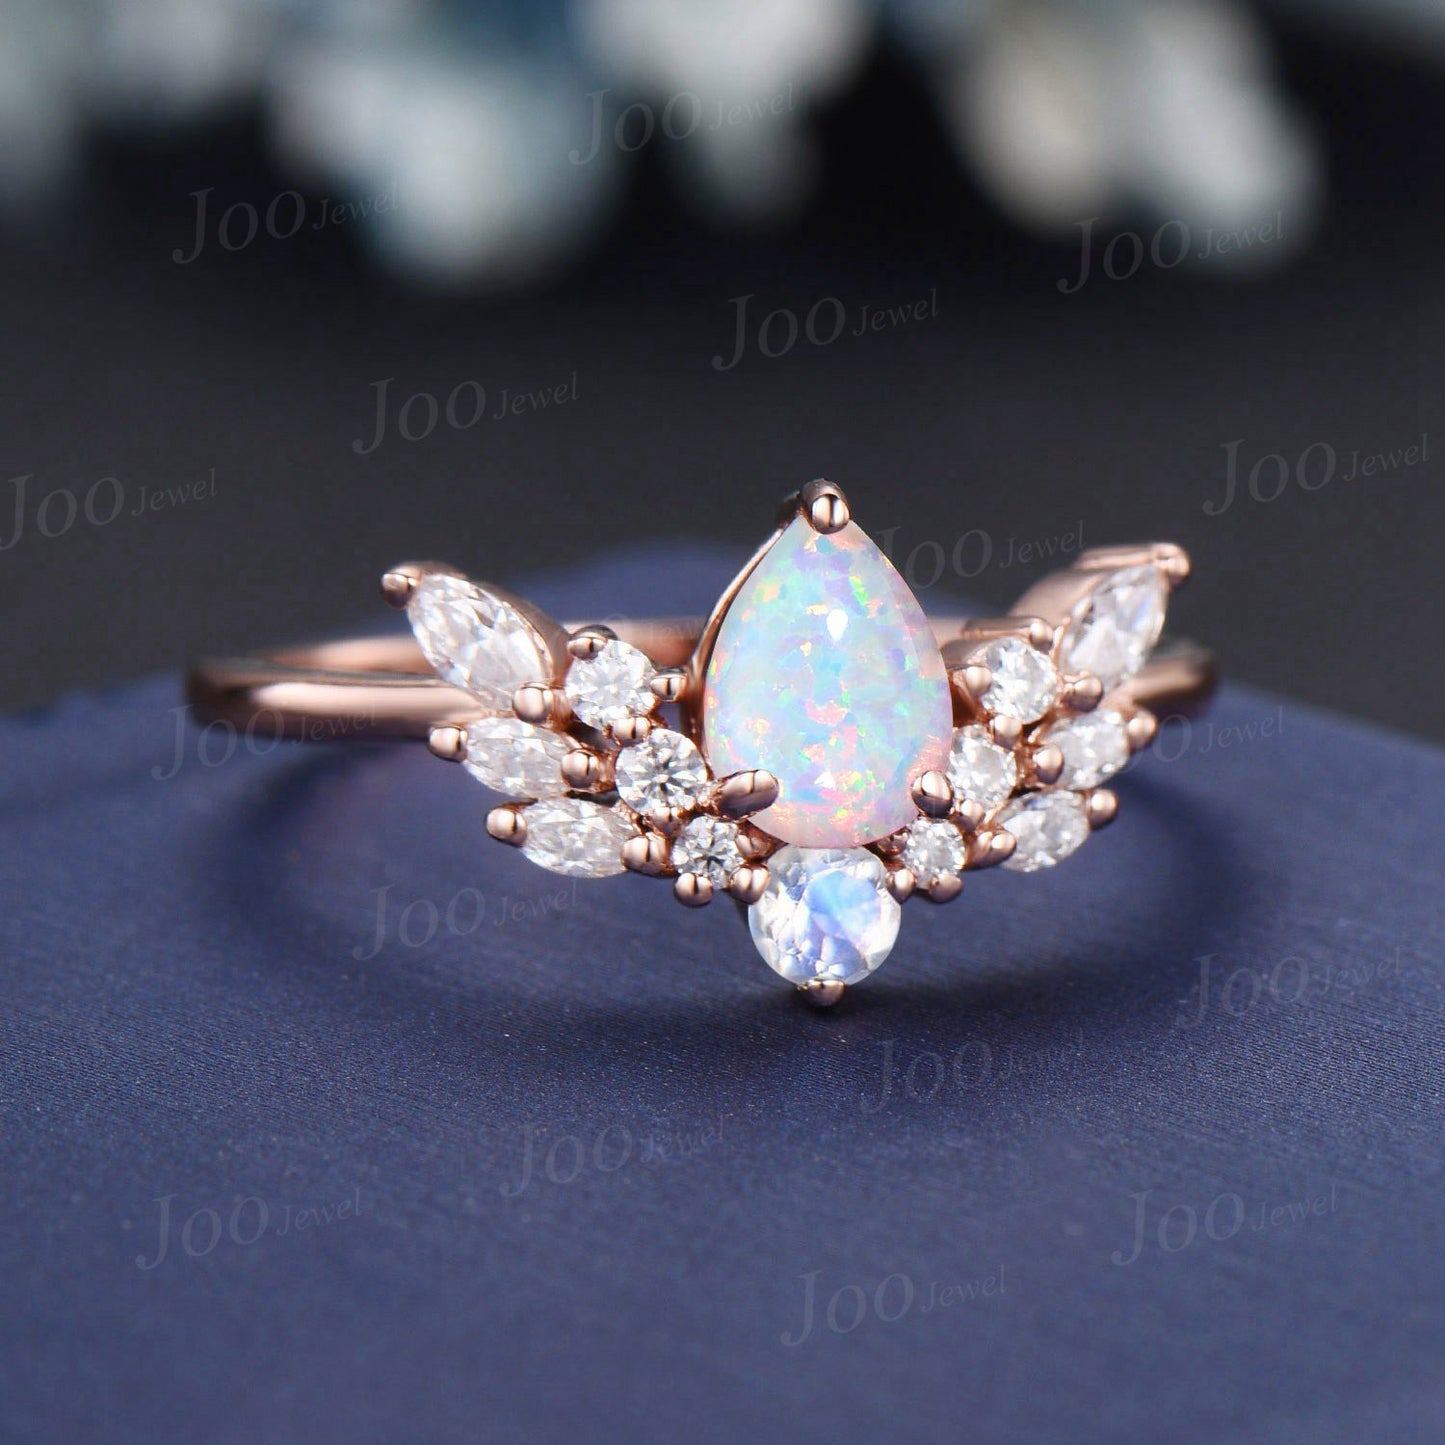 Pear Cut White Opal Ring Angel Wing Design Moissanite Opal Cluster Wedding Ring Round Cut Moonstone Promise Ring Personalized Handmade Gifts